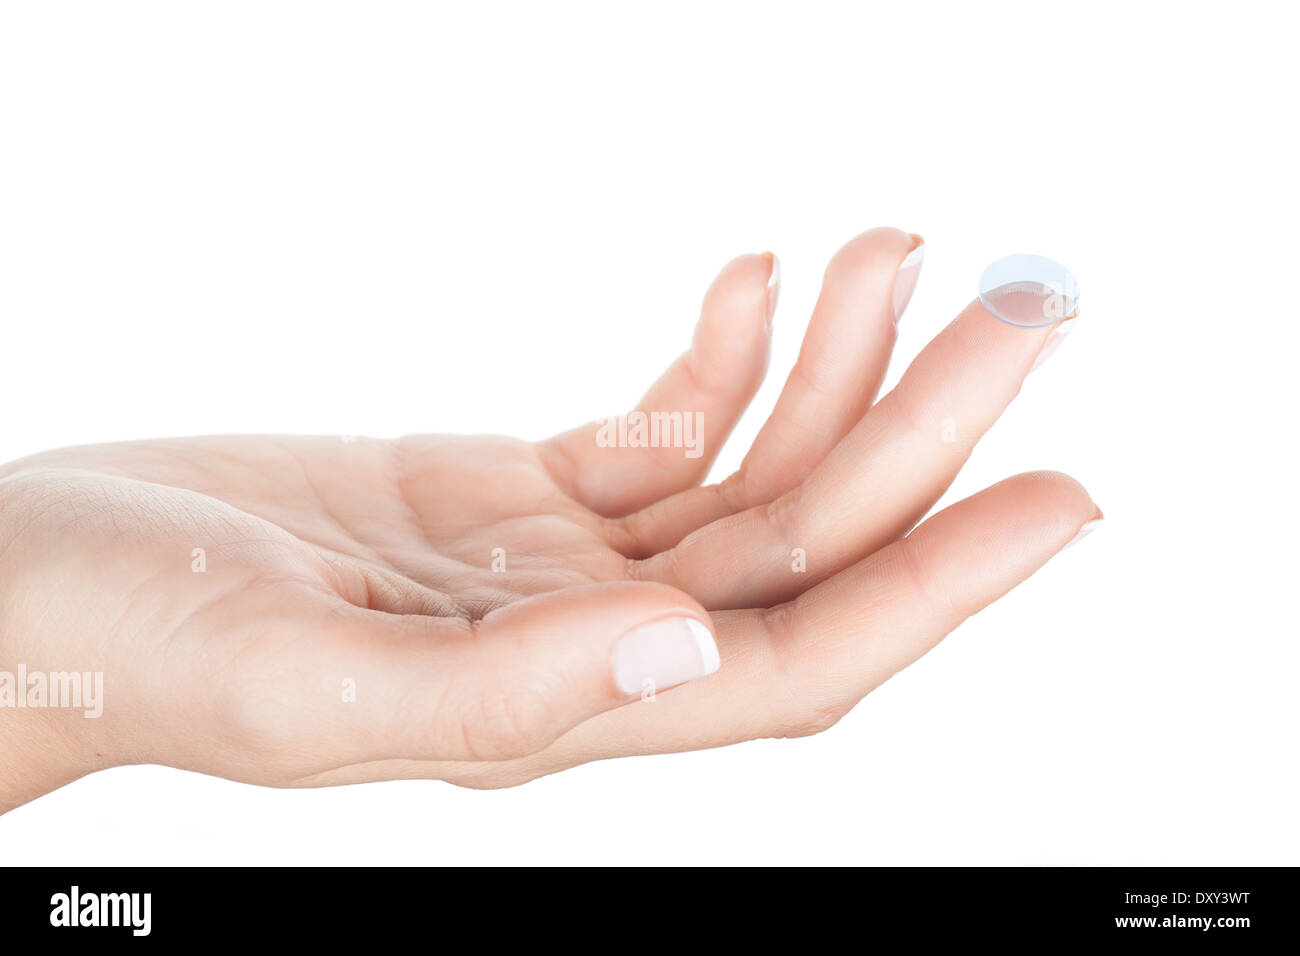 Contact Lens on finger closeup on white background  Stock Photo